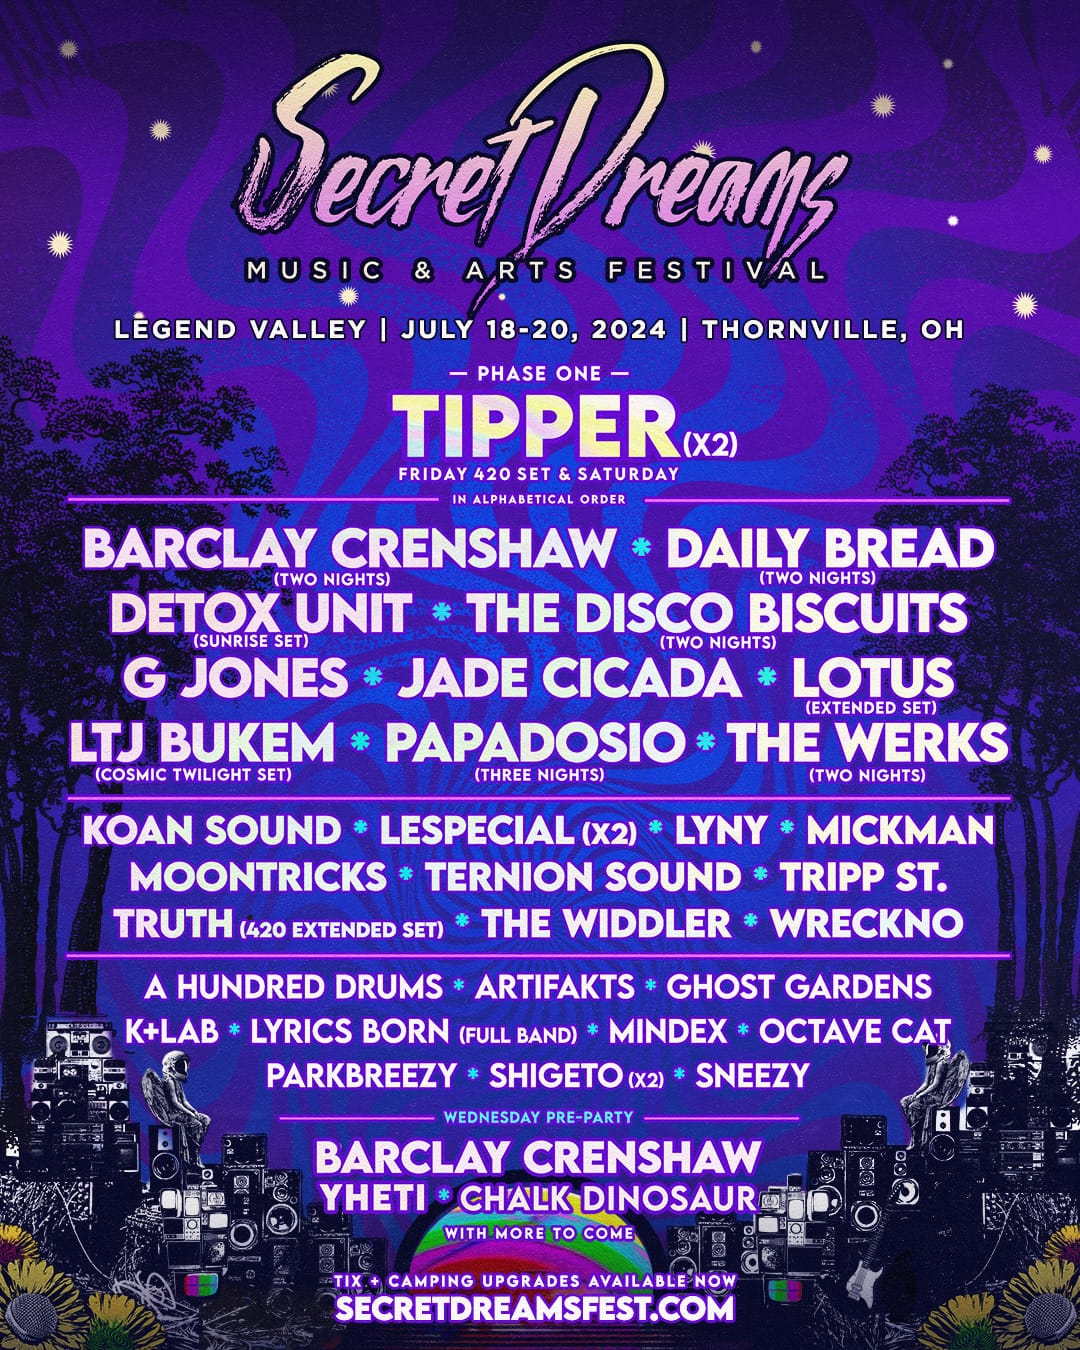 Secret Dreams Music & Arts Festival Unveils Phase One Artist Lineup: Tipper, Disco Biscuits, Lotus and More